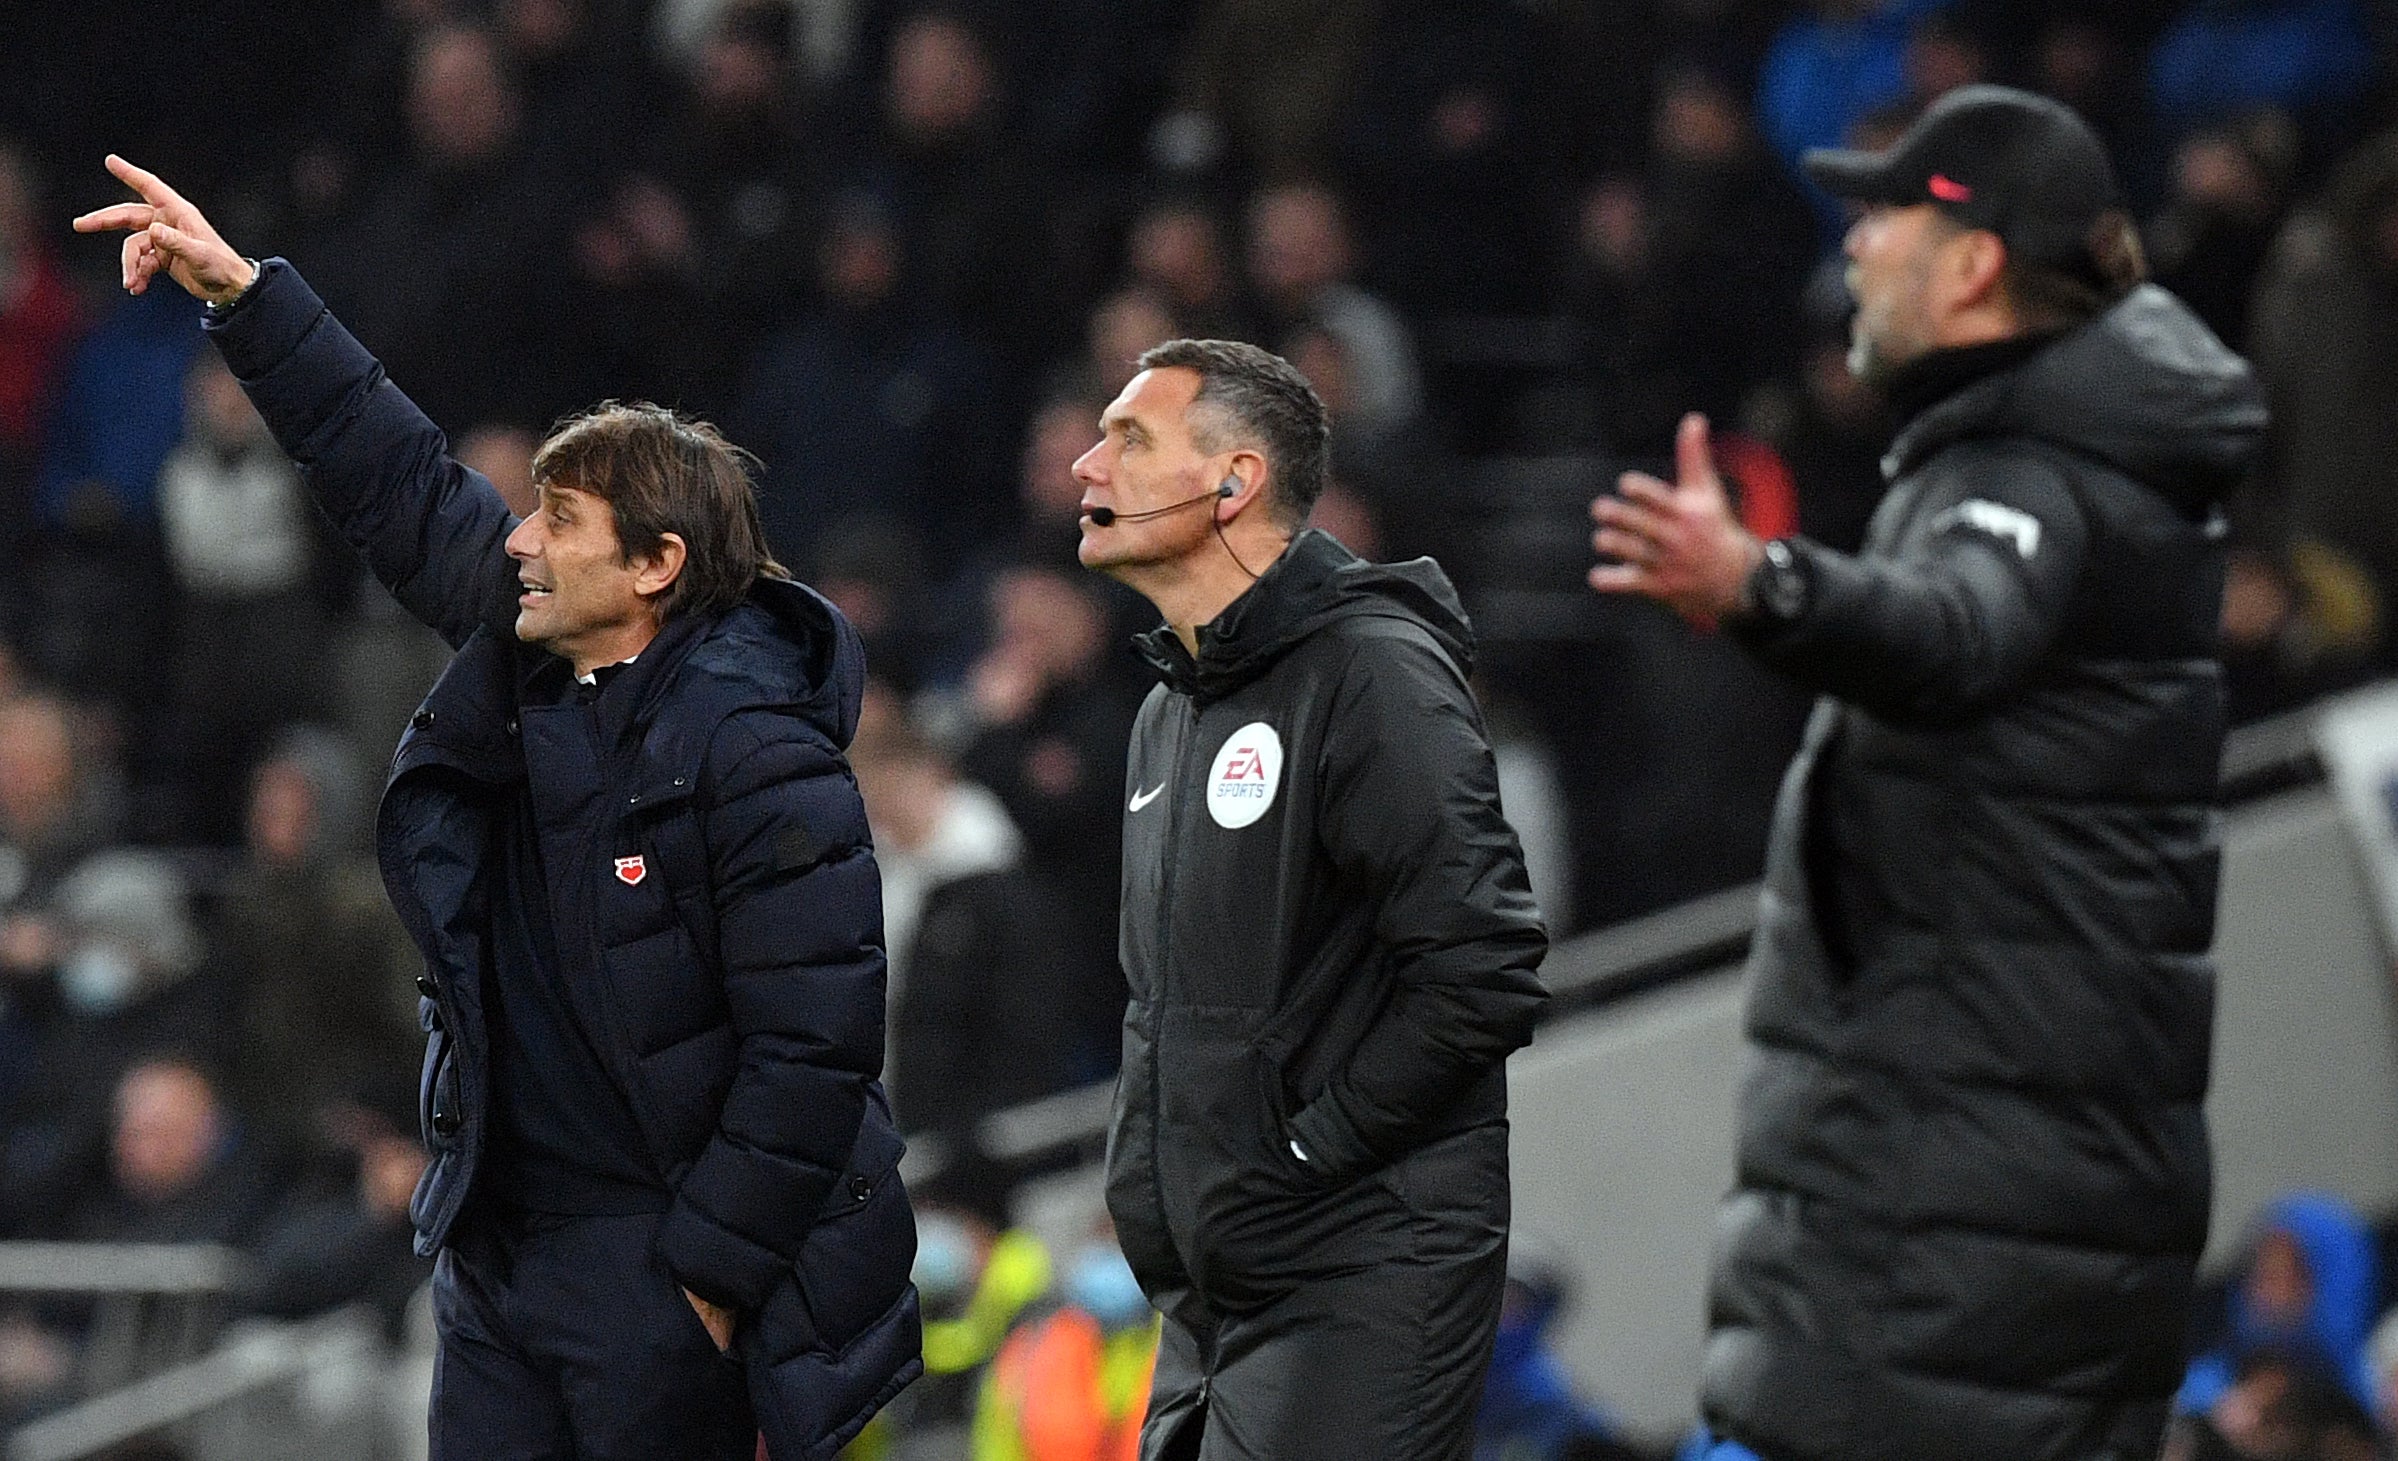 Antonio Conte and Jurgen Klopp offer contrasting styles of management